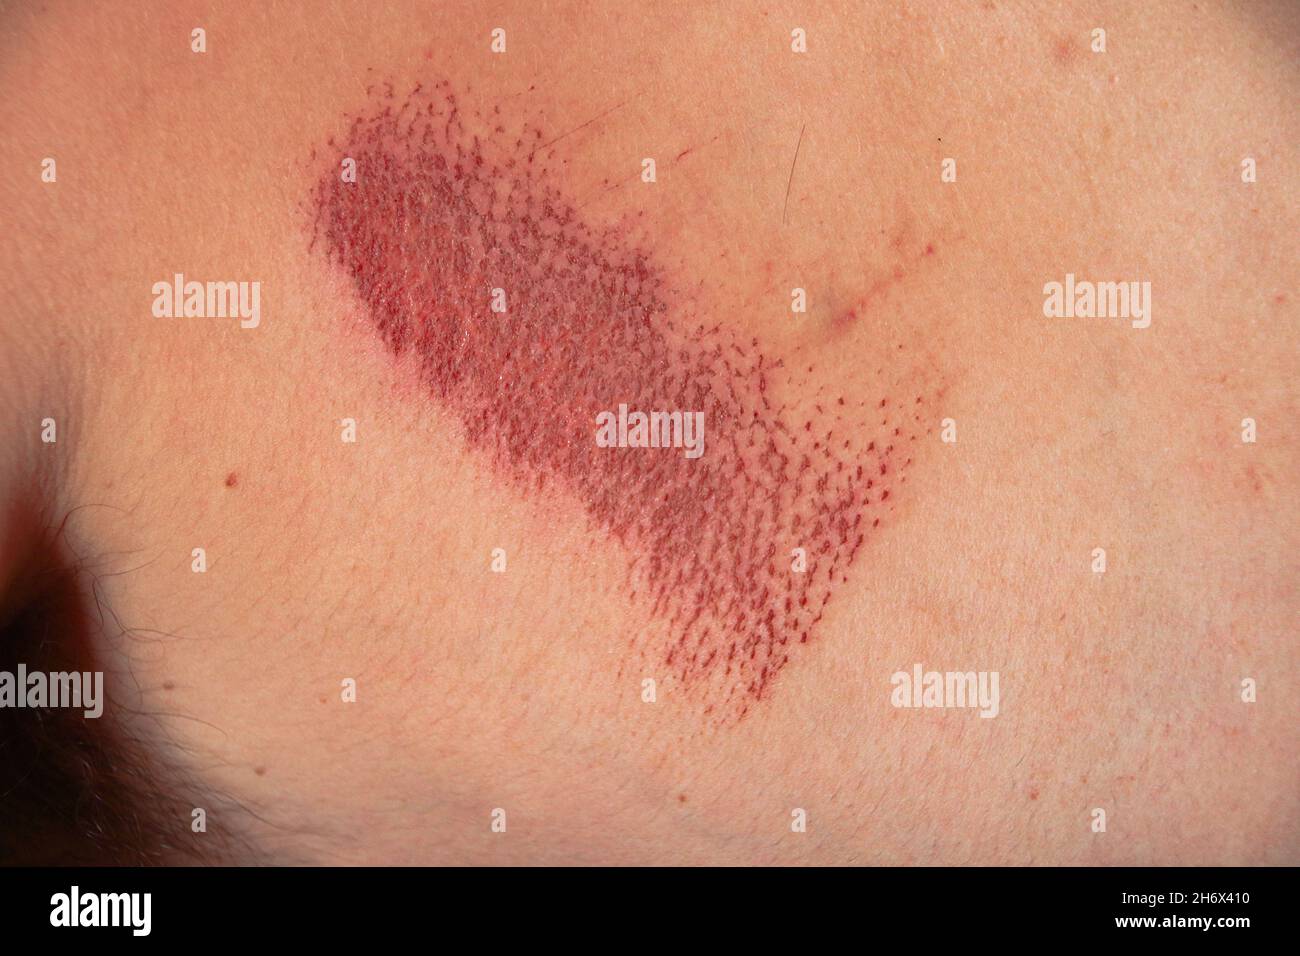 Close up of an abrasion wound in Caucasian skin Stock Photo